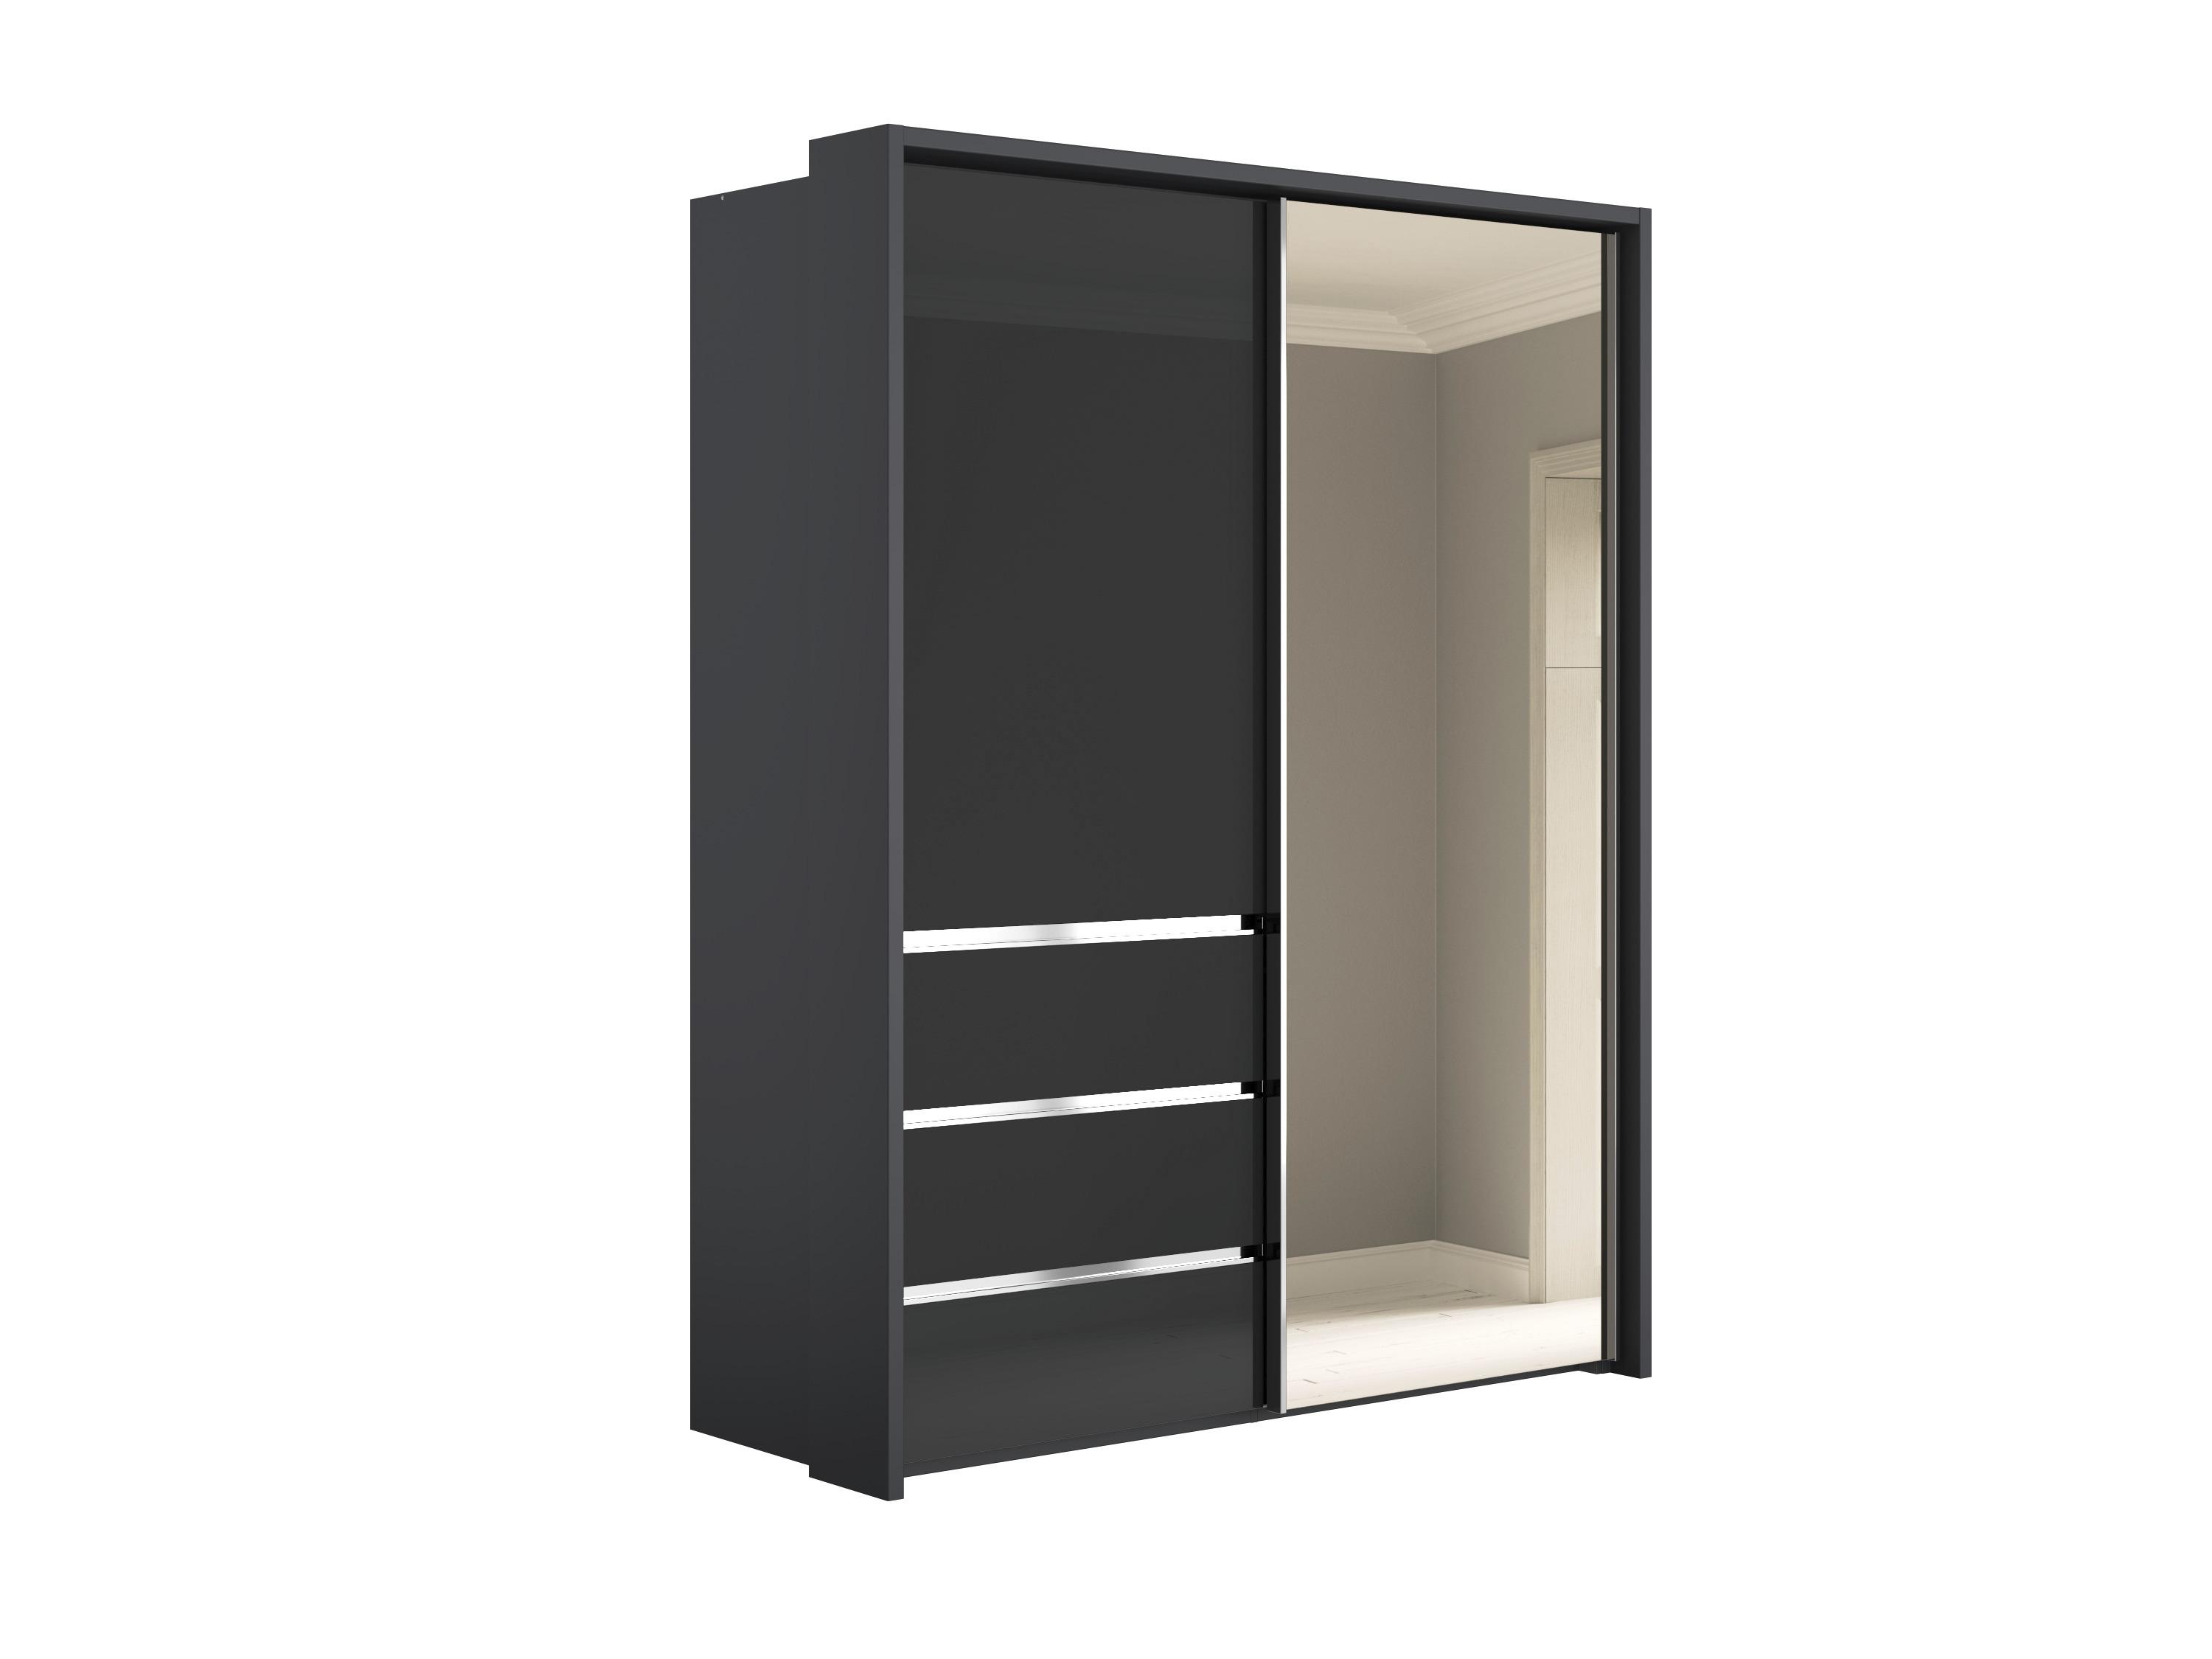 Pacifica 2 175cm 2 Door Sliding Wardrobe with 3 Drawers and Mirror Door in Graphite/Glass Graphite on Furniture Village